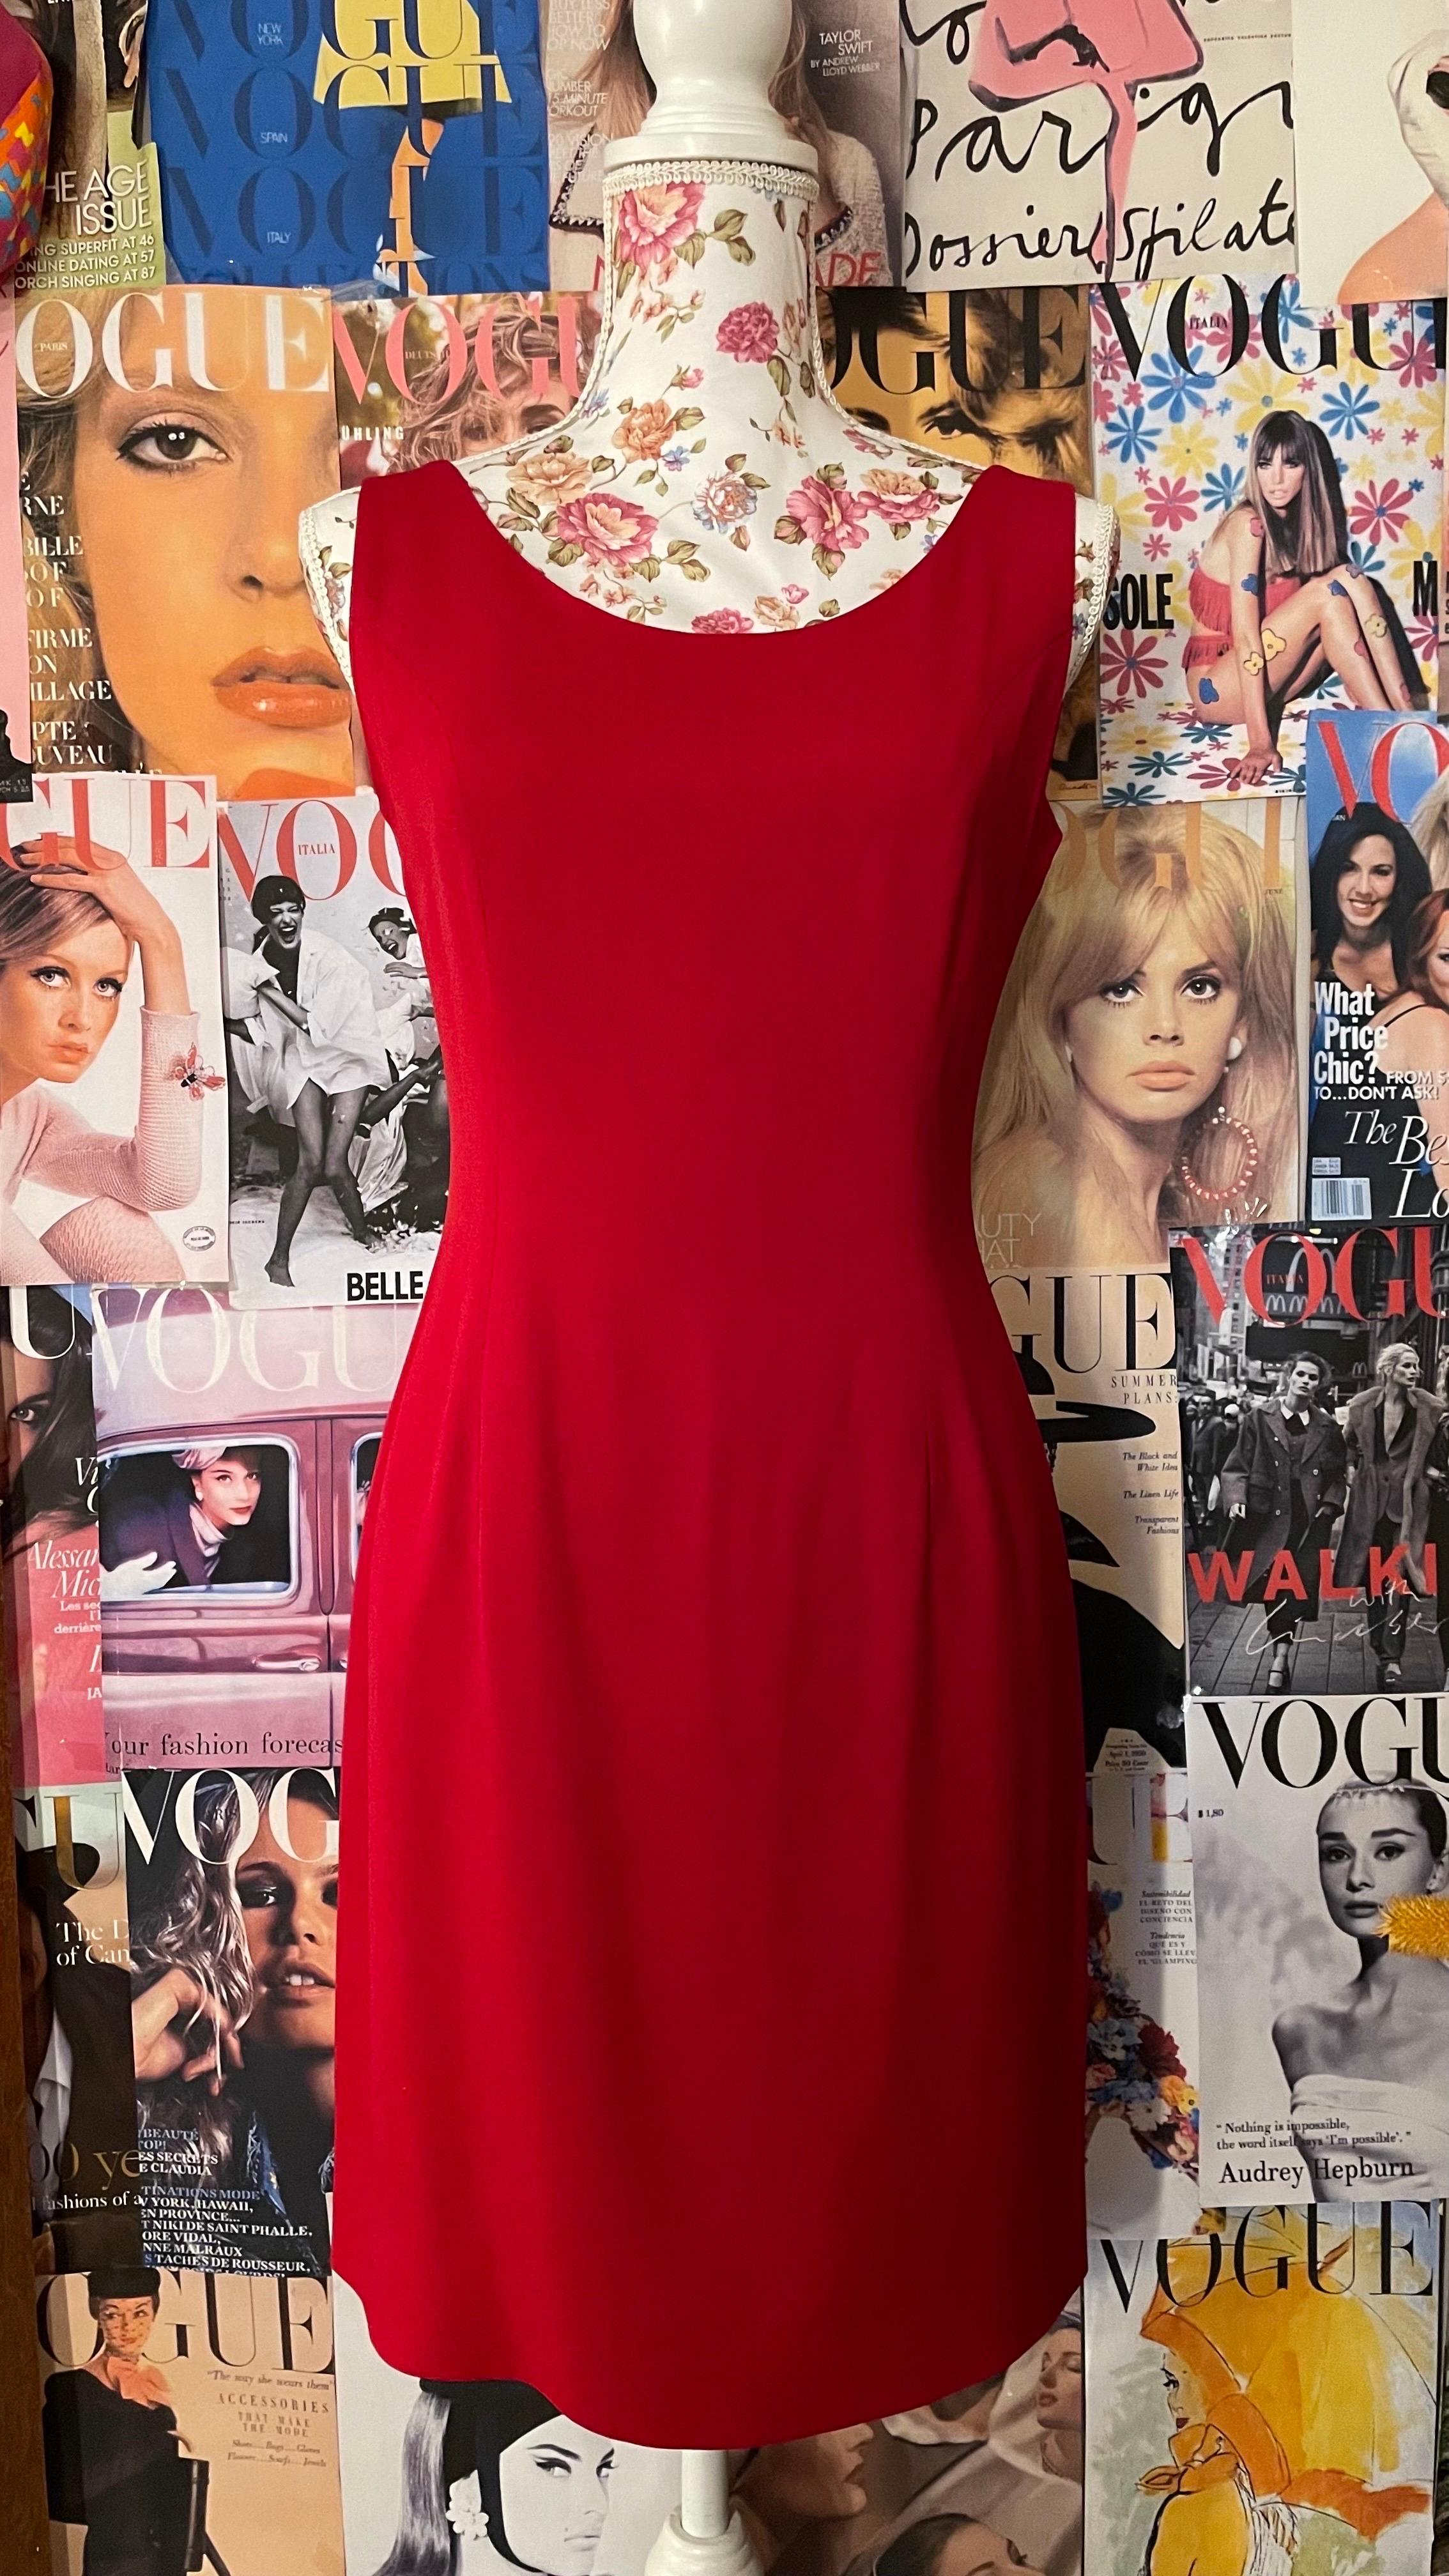 1990' vintage red dress by Moschino cheap & chic. In perfect condition. 79% acetate 21% rayon.


Sizes :
I 40
FR 36 
US 6
UK 8

Measurements laid flat : 

Waist 36 cm 
Bust 42 cm 
Lenght 72 cm



Please make sure you know and understand the laws in